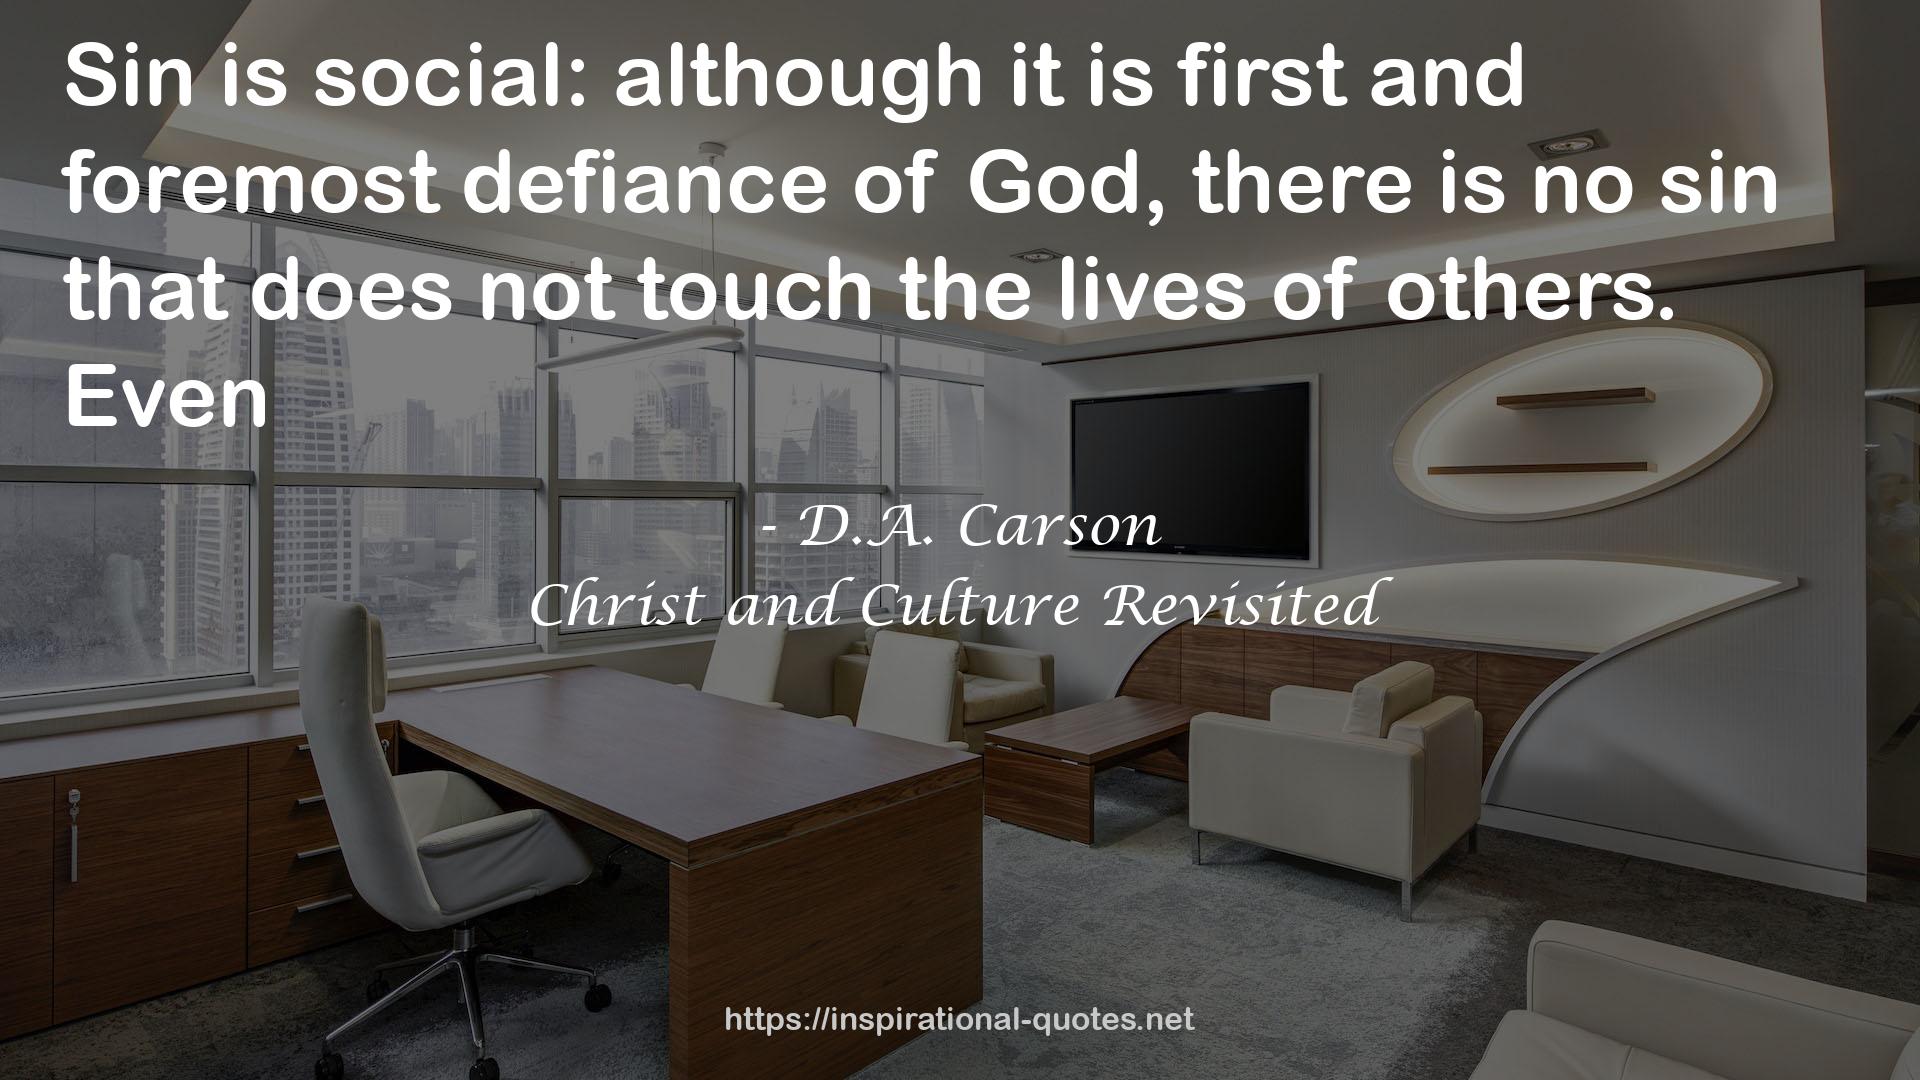 Christ and Culture Revisited QUOTES